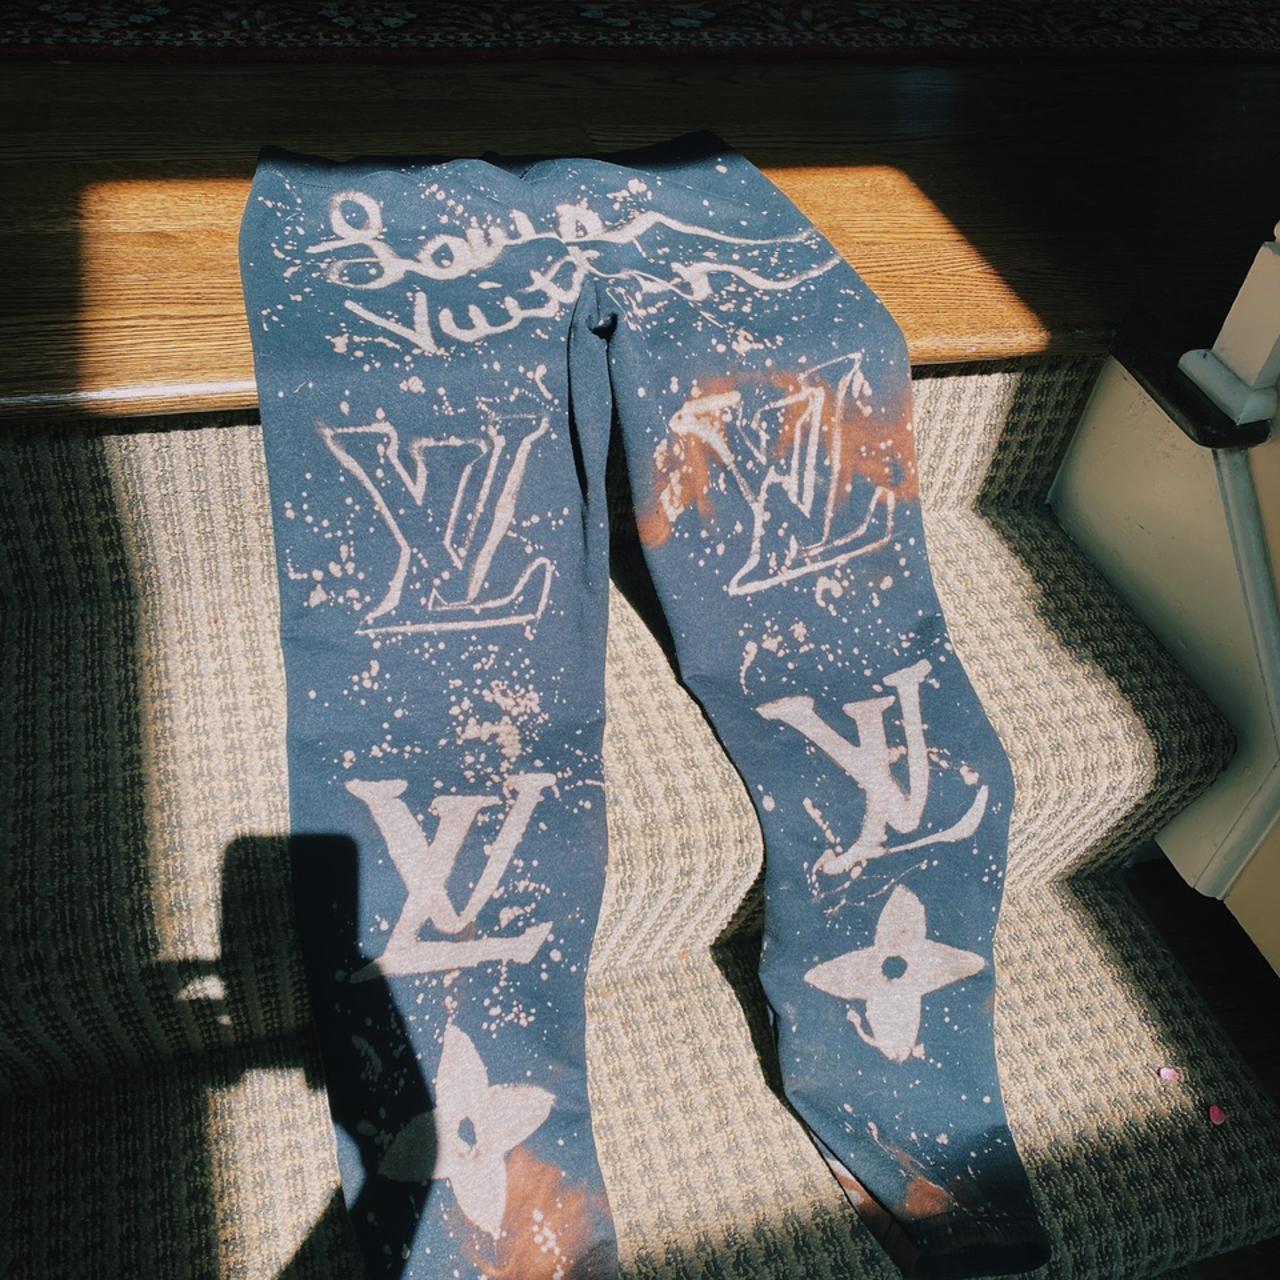 Handmade LV sweatpants!! This is a customized order, - Depop